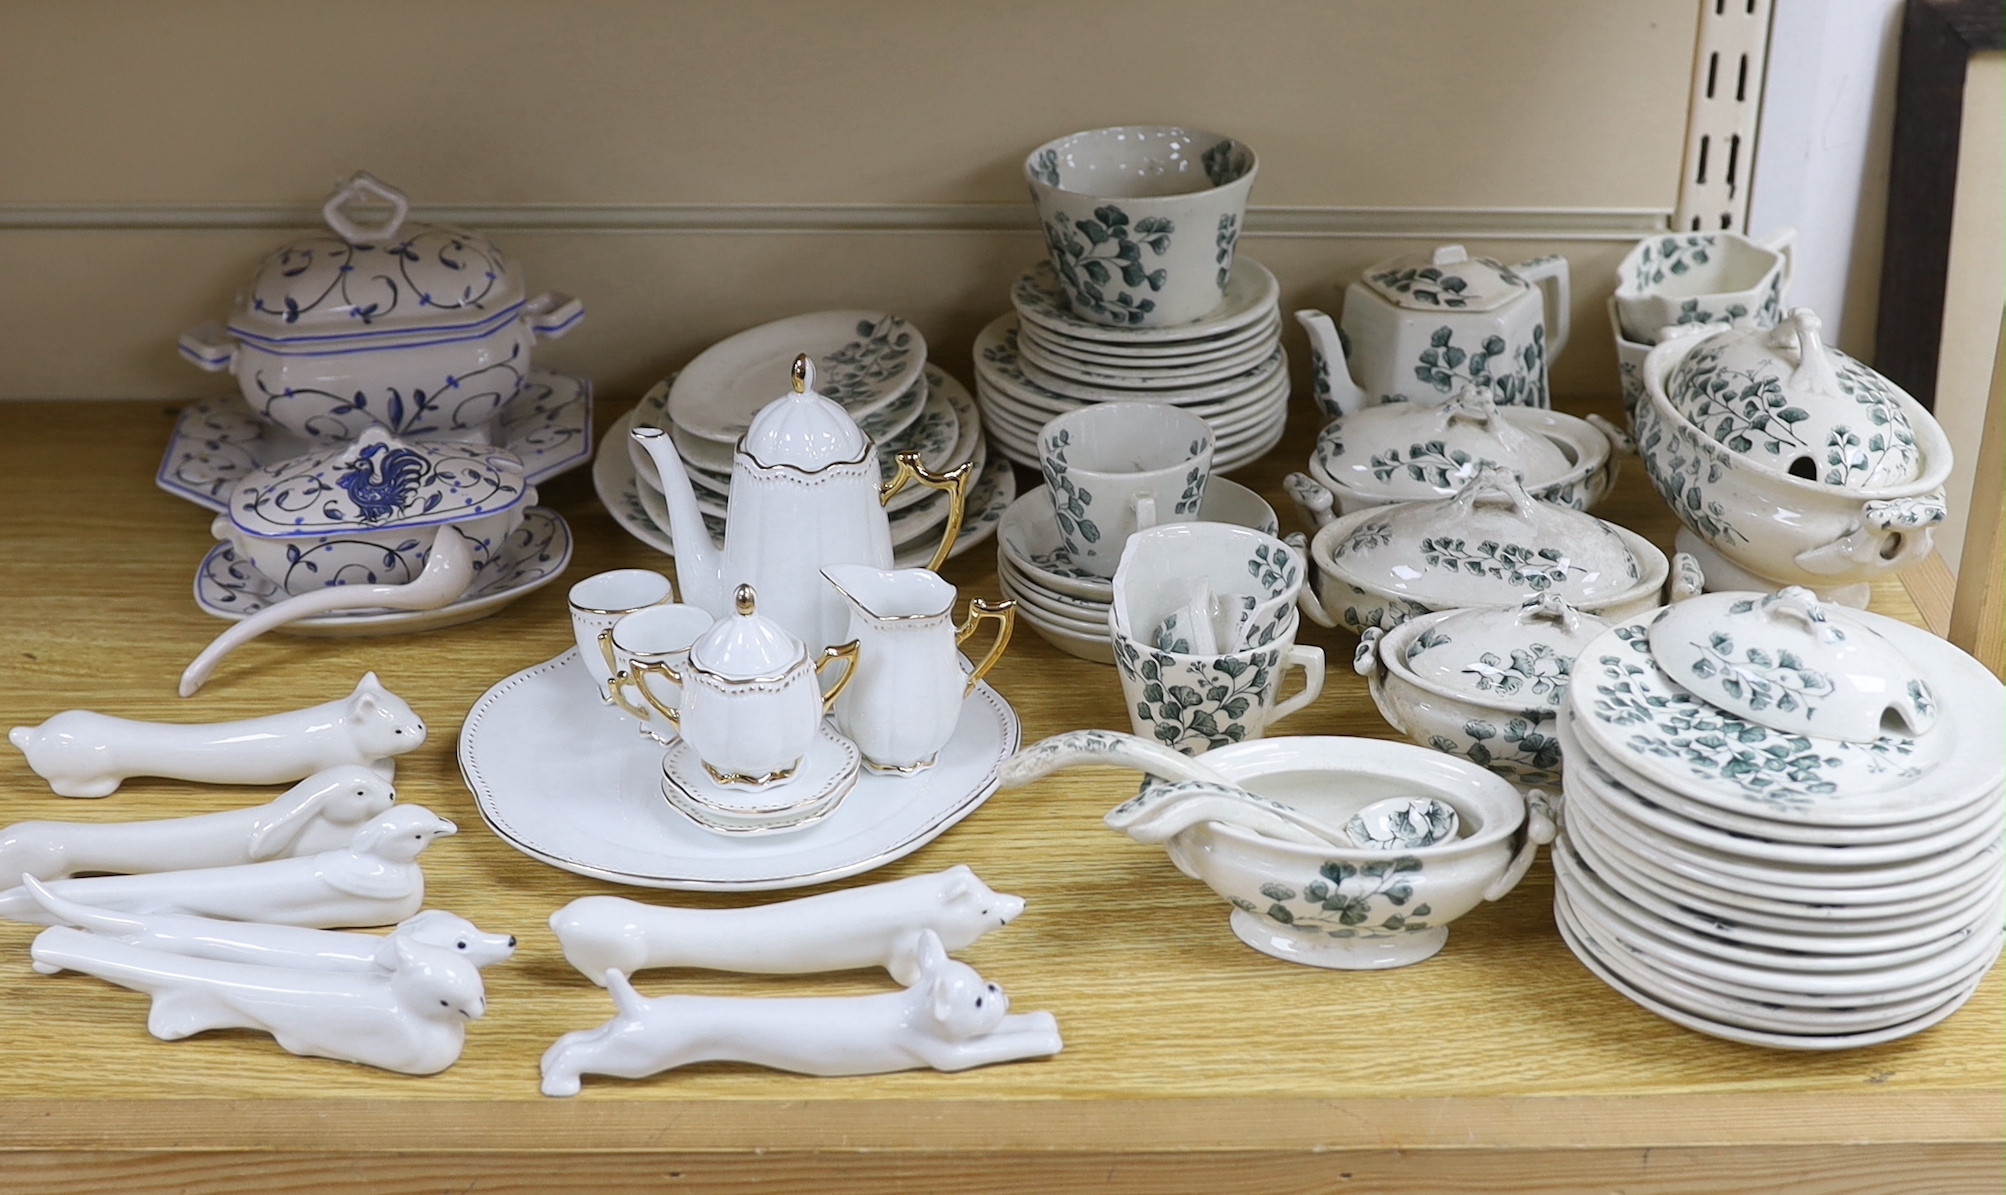 A Ridgways ‘Maiden Hair Fern’ children’s dinner set, together with other miniature tea ware and animalistic knife rests